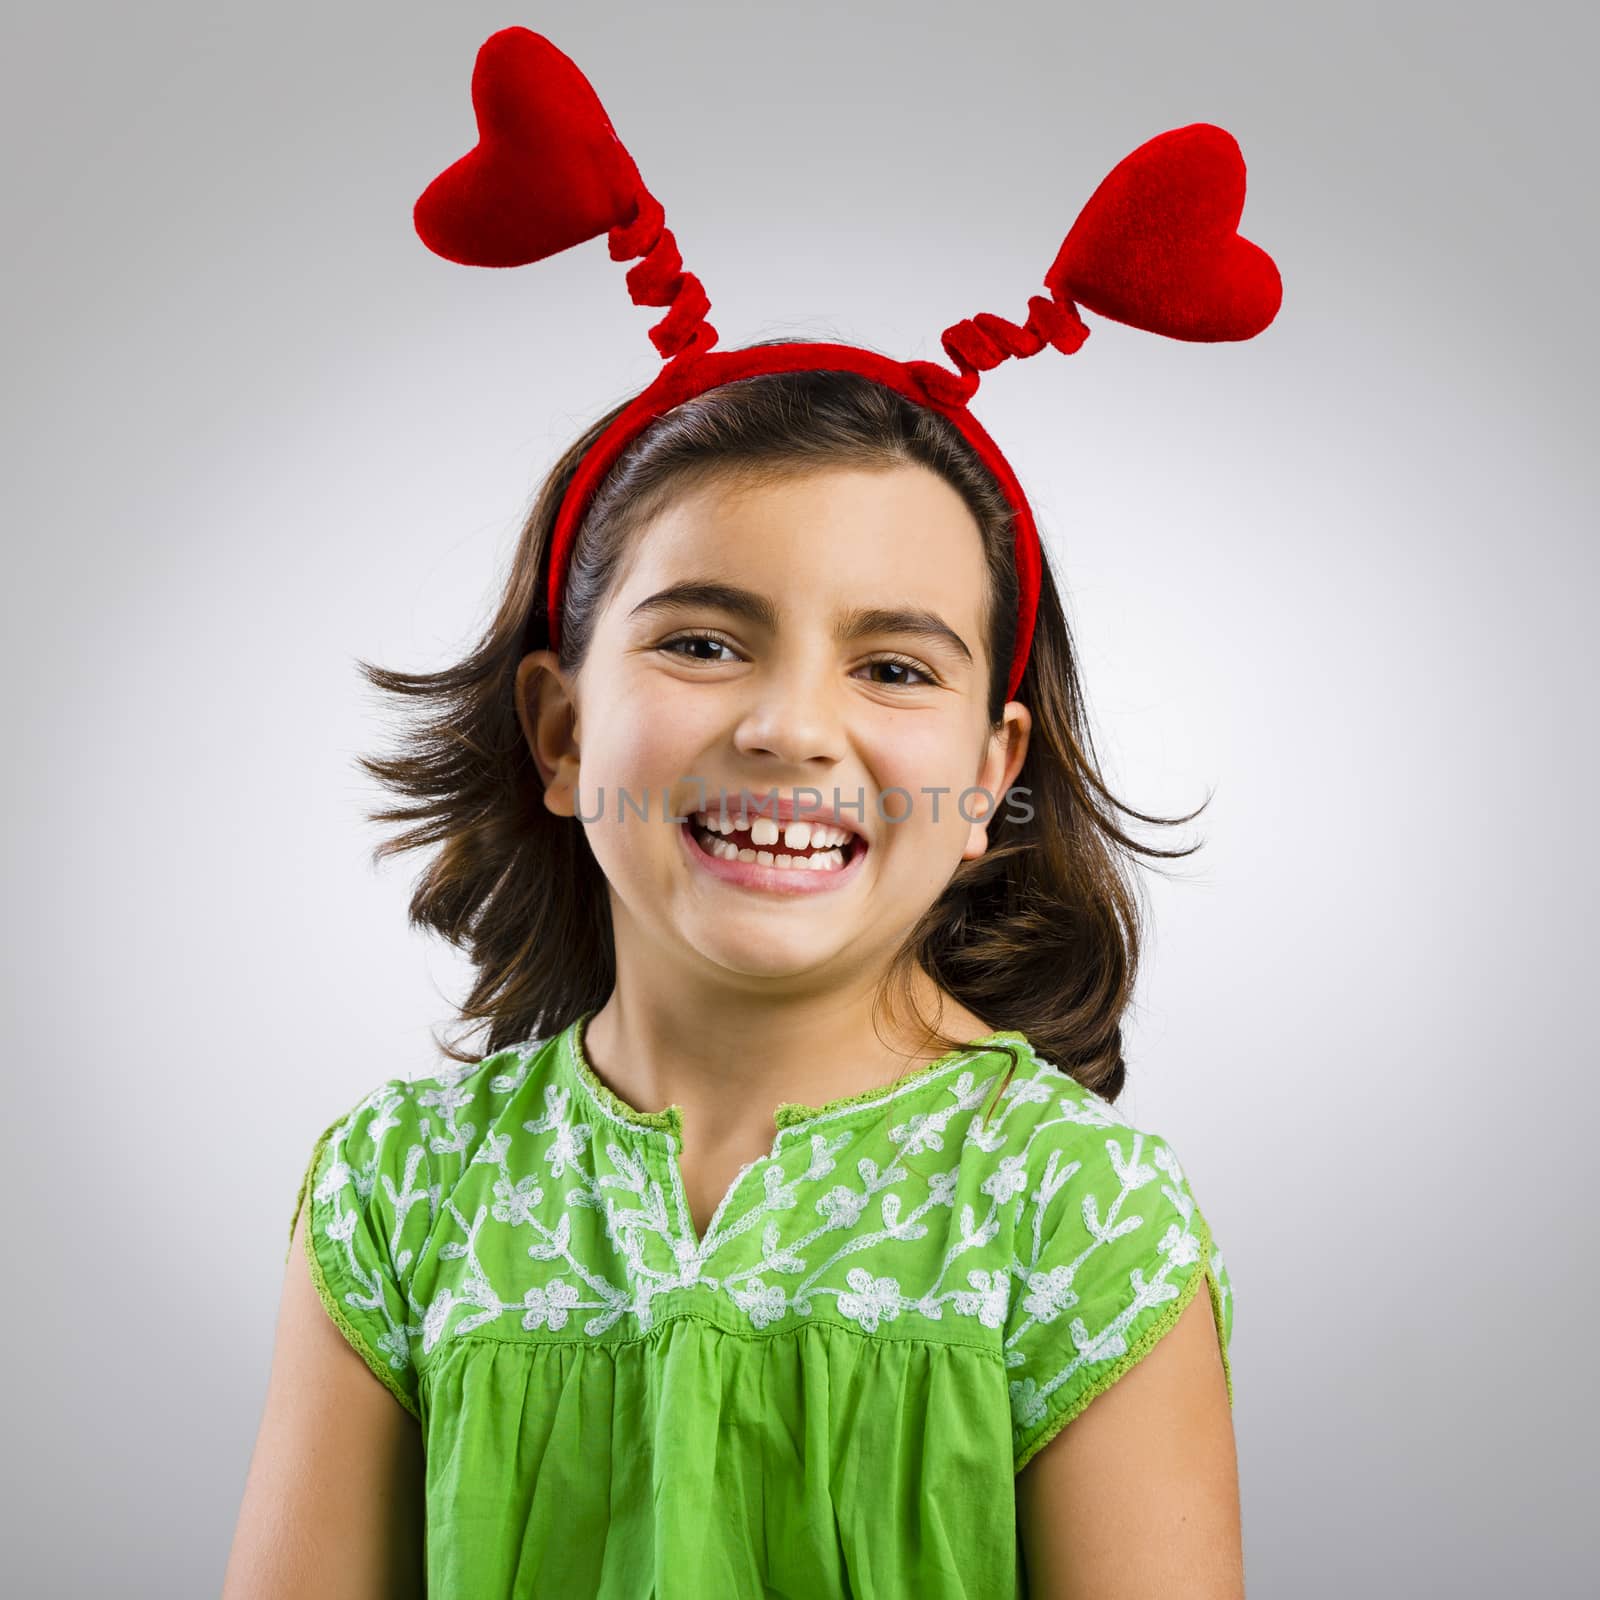 Studio portrait of a little girl wearing a headband with hearts